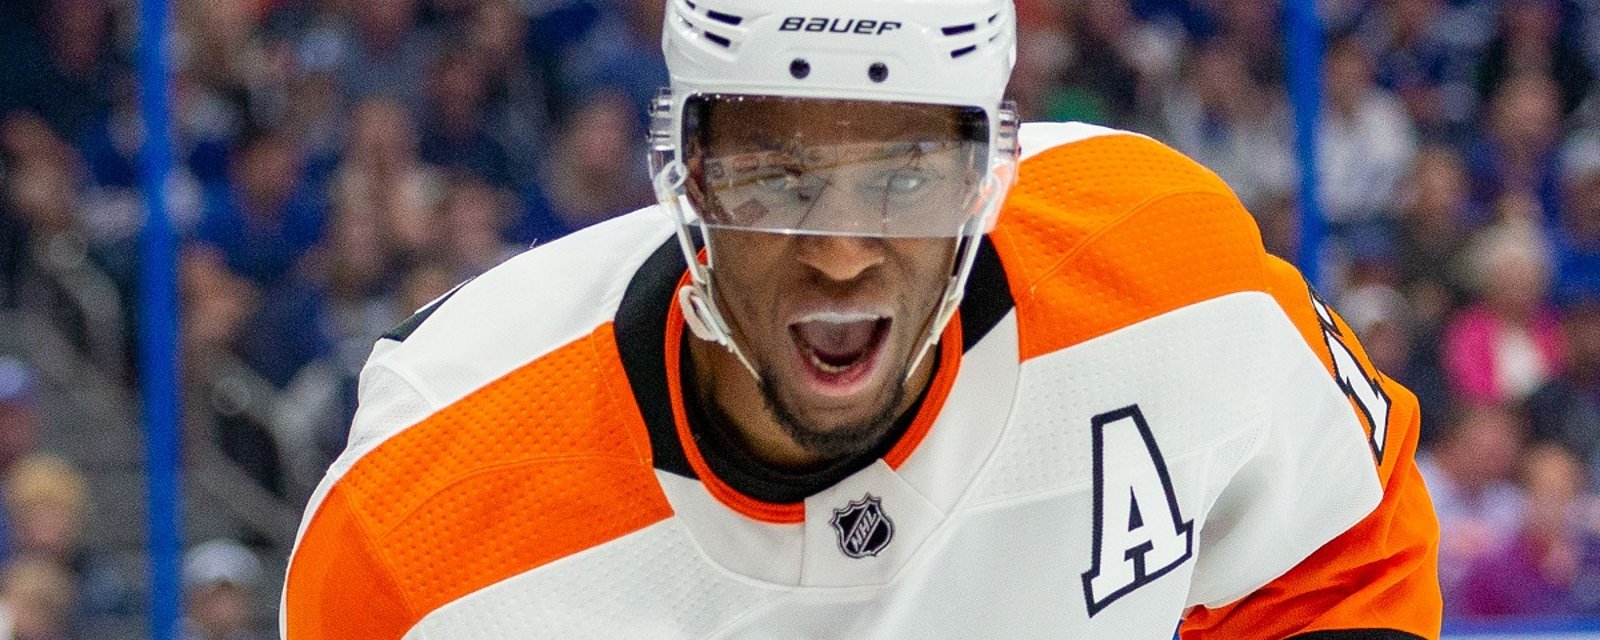 Breaking: Wayne Simmonds makes a very surprising choice in free agency.